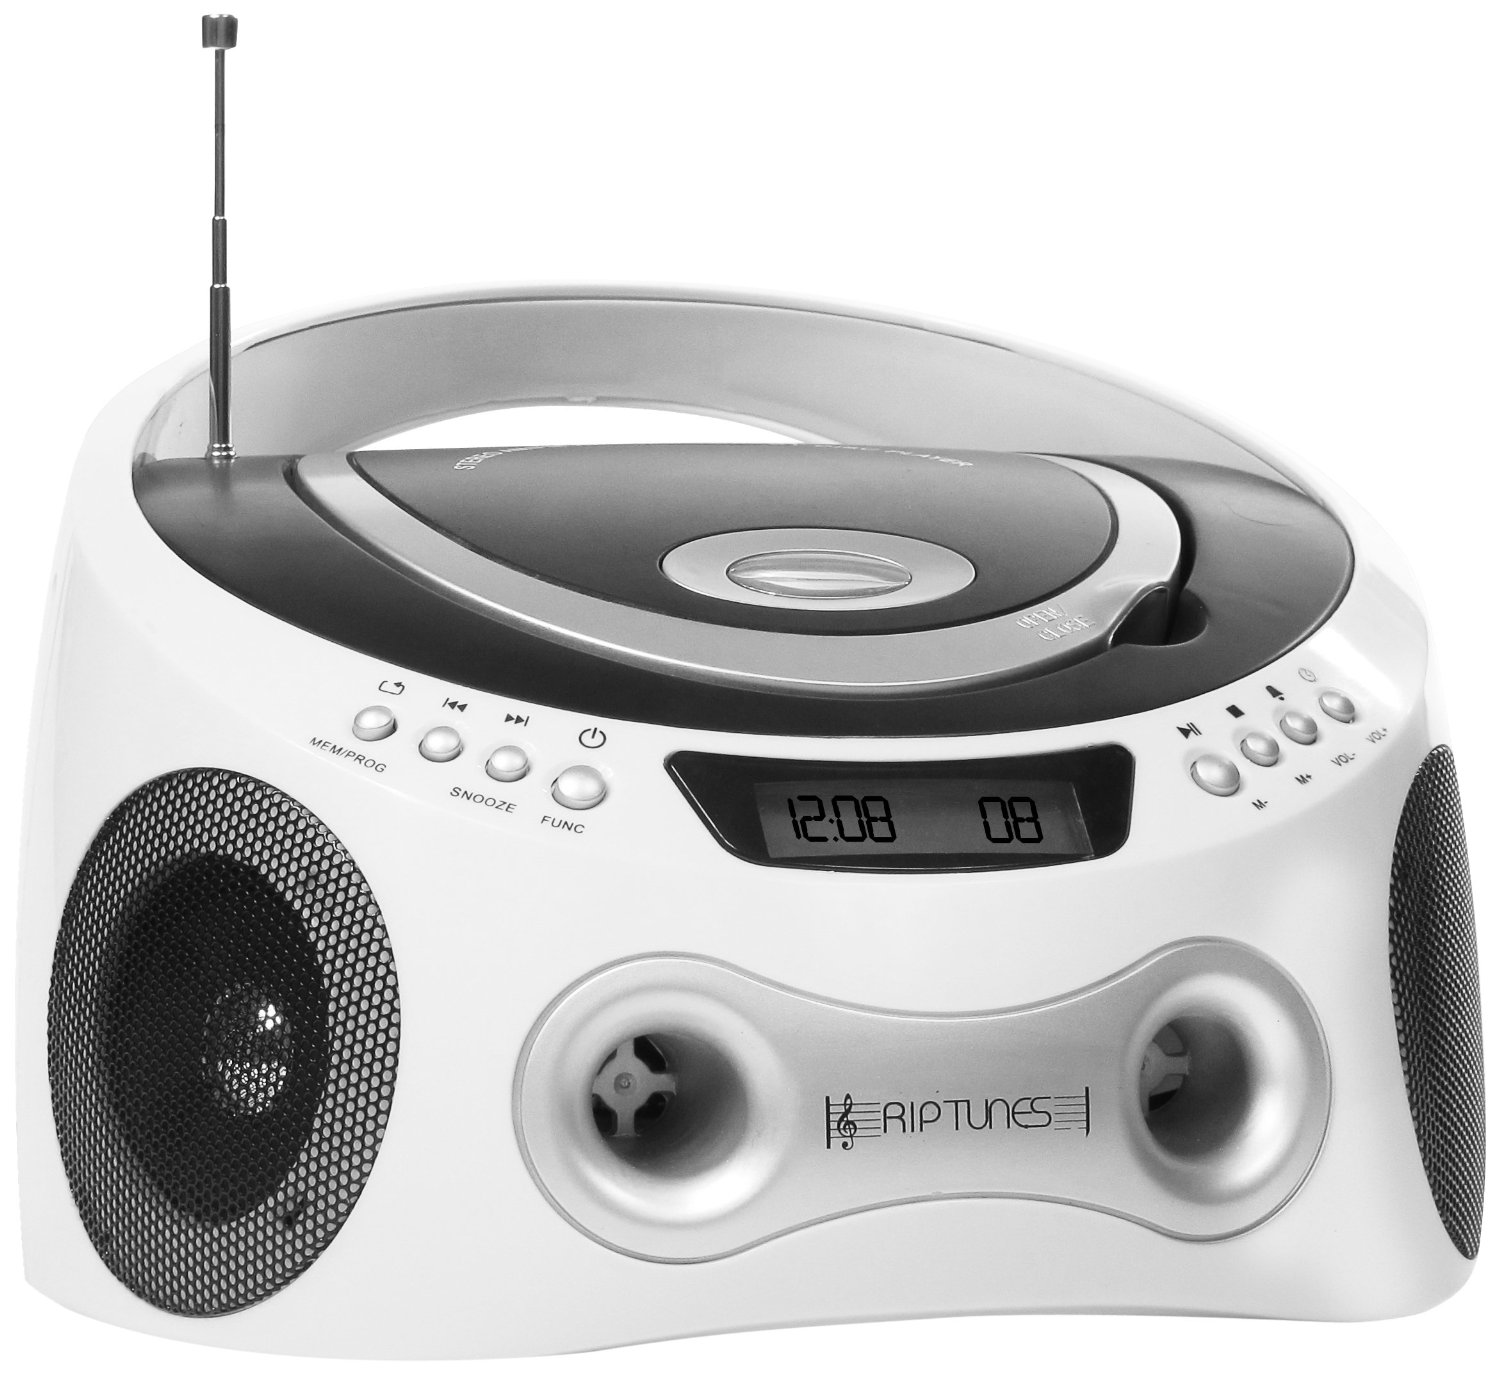 Riptunes Cd Mp3 Radio Stereo Boombox With Display And Aux-in Port For All Mp3 Players